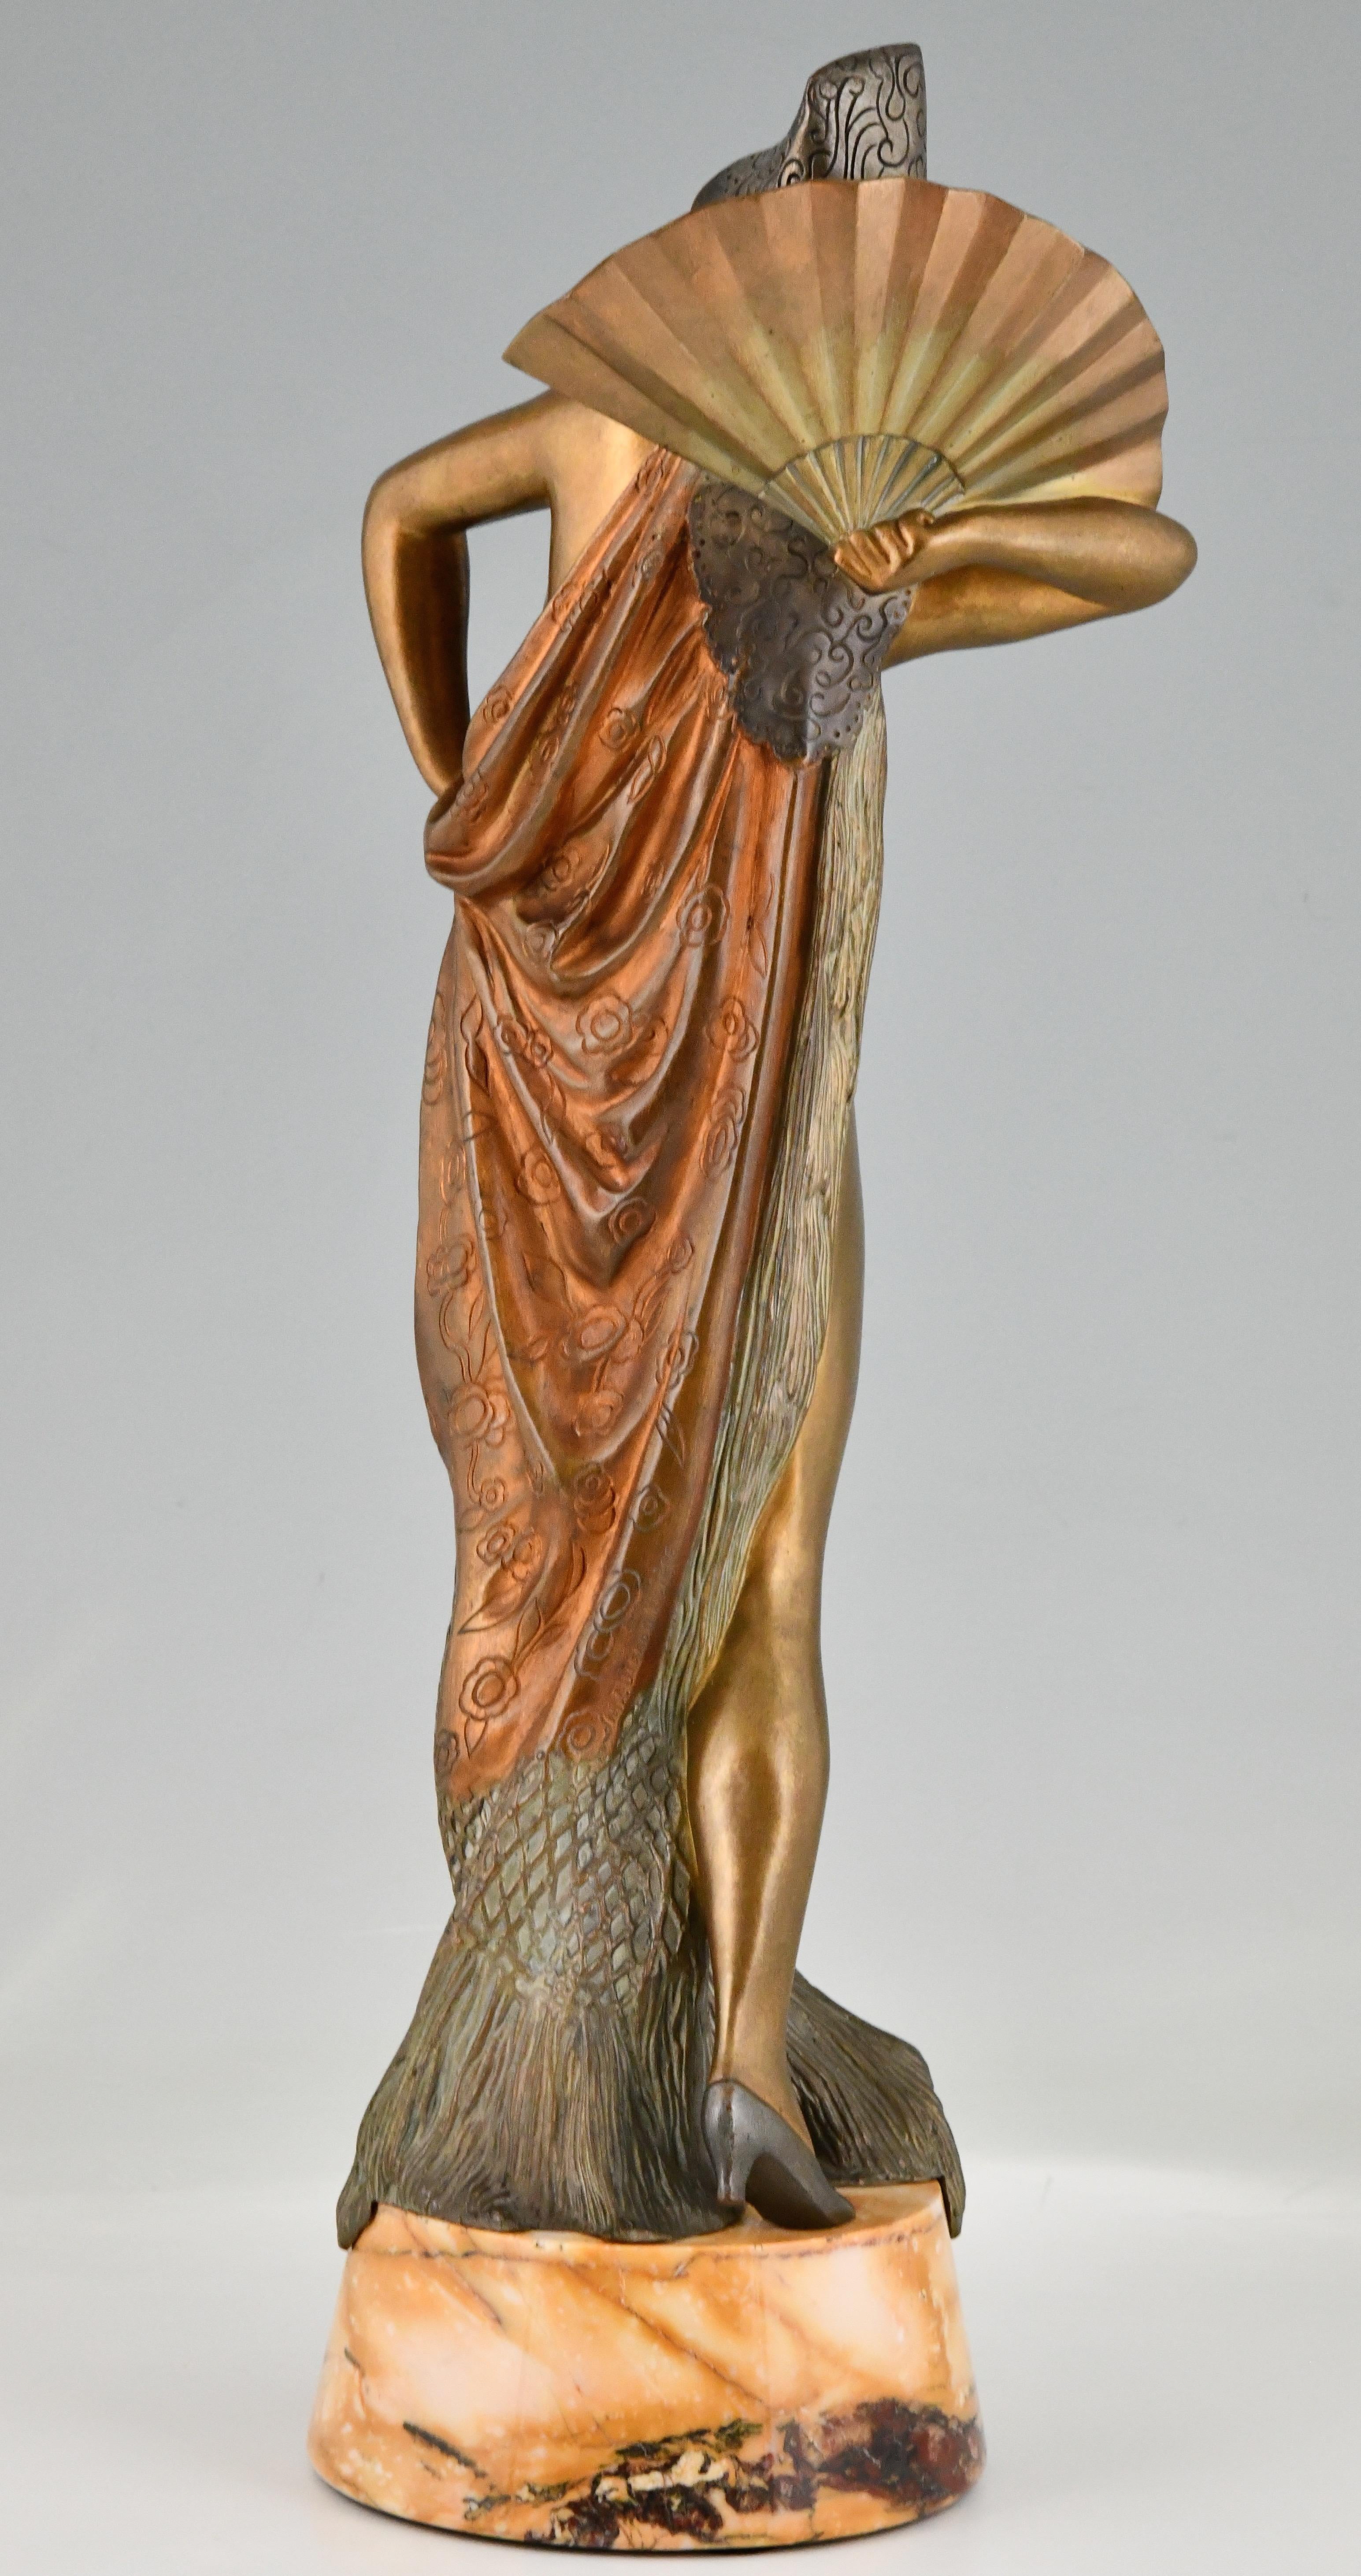 Patinated Art Deco Bronze Sculpture of a Spanish Dancer by Maurice Guiraud Rivière 1925 For Sale